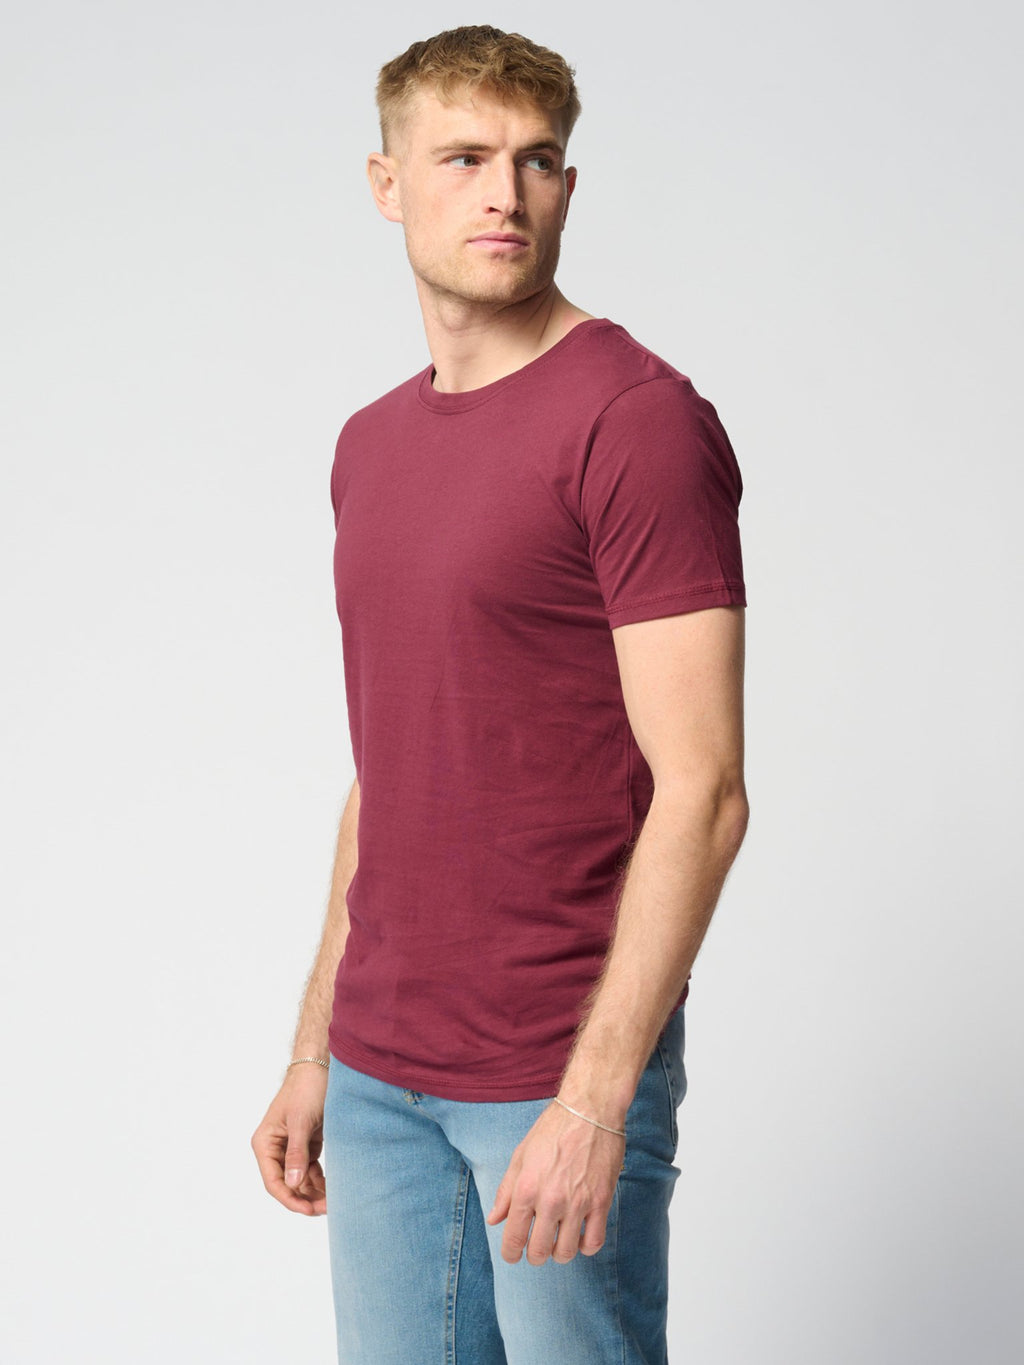 Muscle T-shirt - Burgundy Red